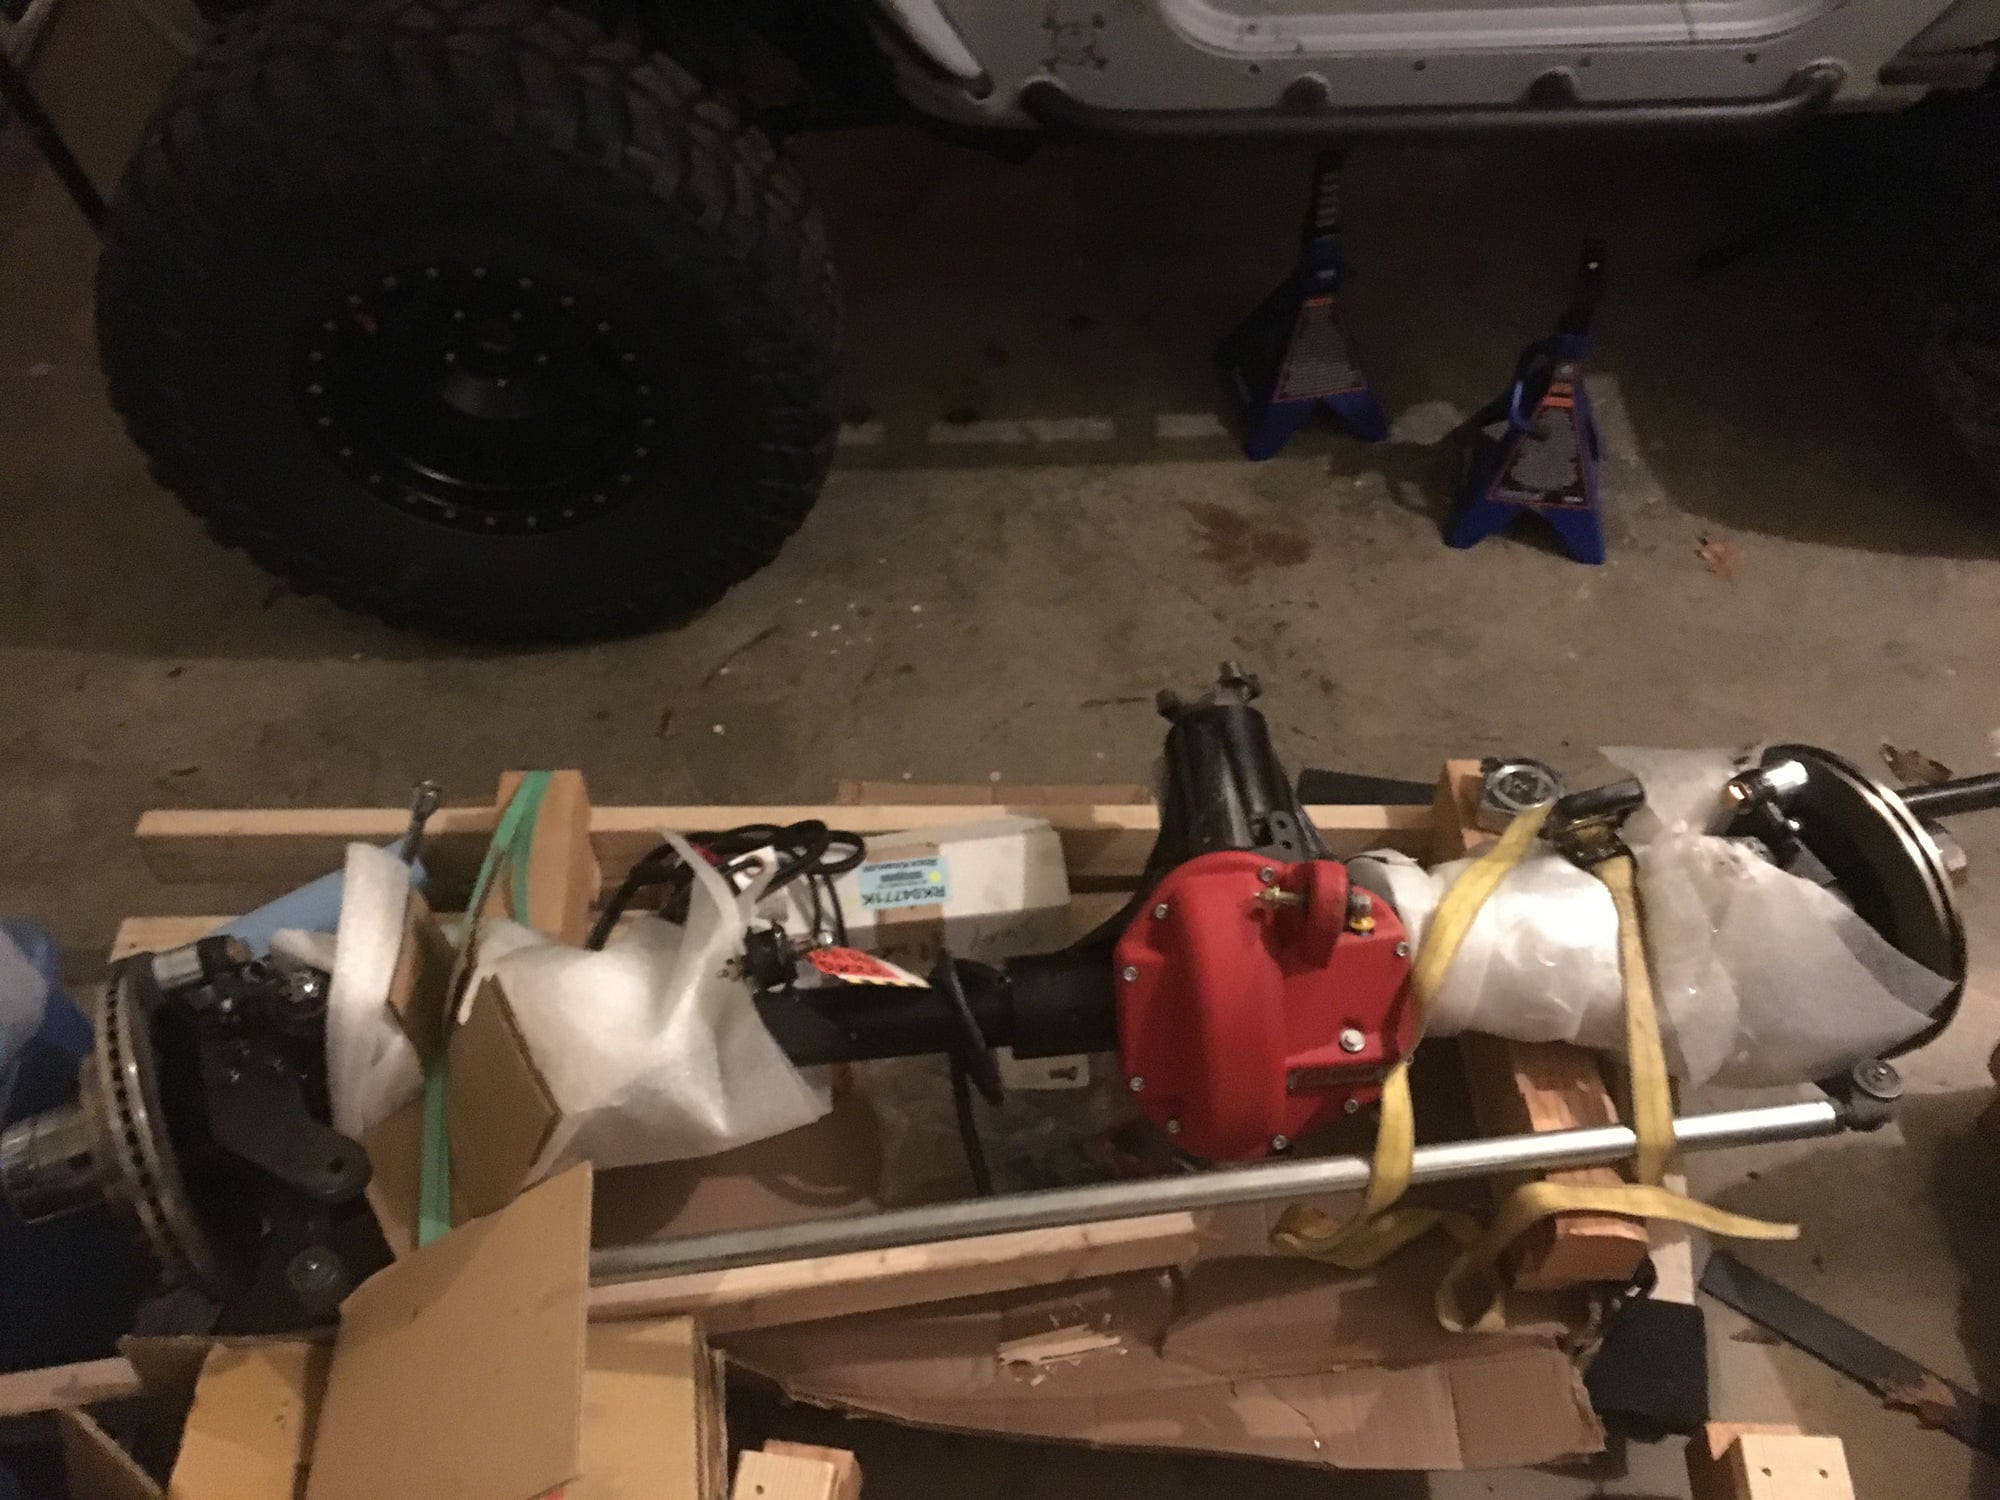 Drivetrain - New in crate front & rear Currie rock jock 60s - New - 2007 to 2018 Jeep Wrangler - Nashville, TN 37214, United States